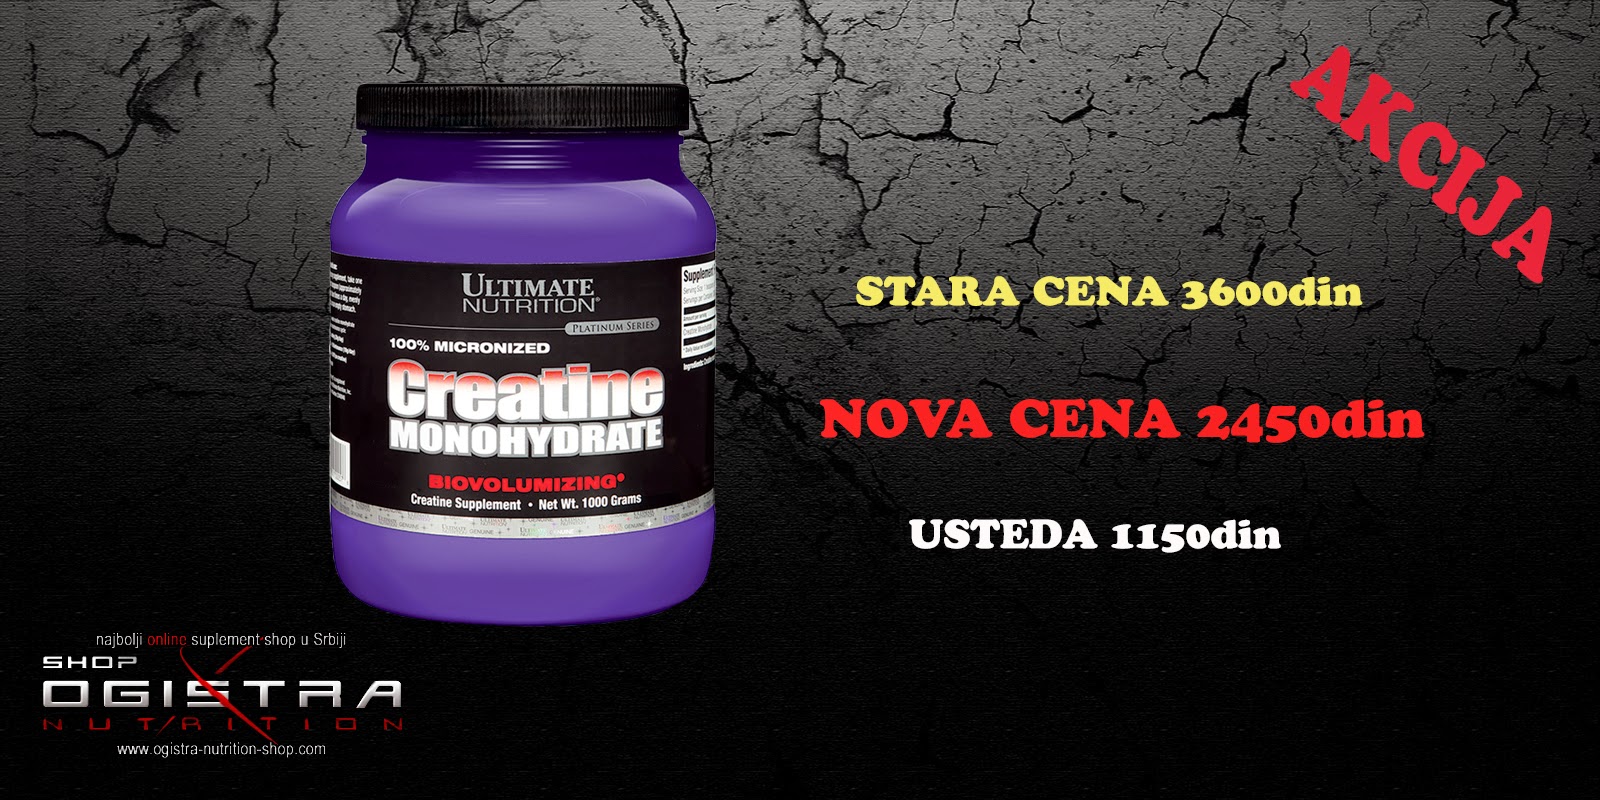 http://www.ogistra-nutrition-shop.com/index.php?dispatch=products.view&product_id=29954